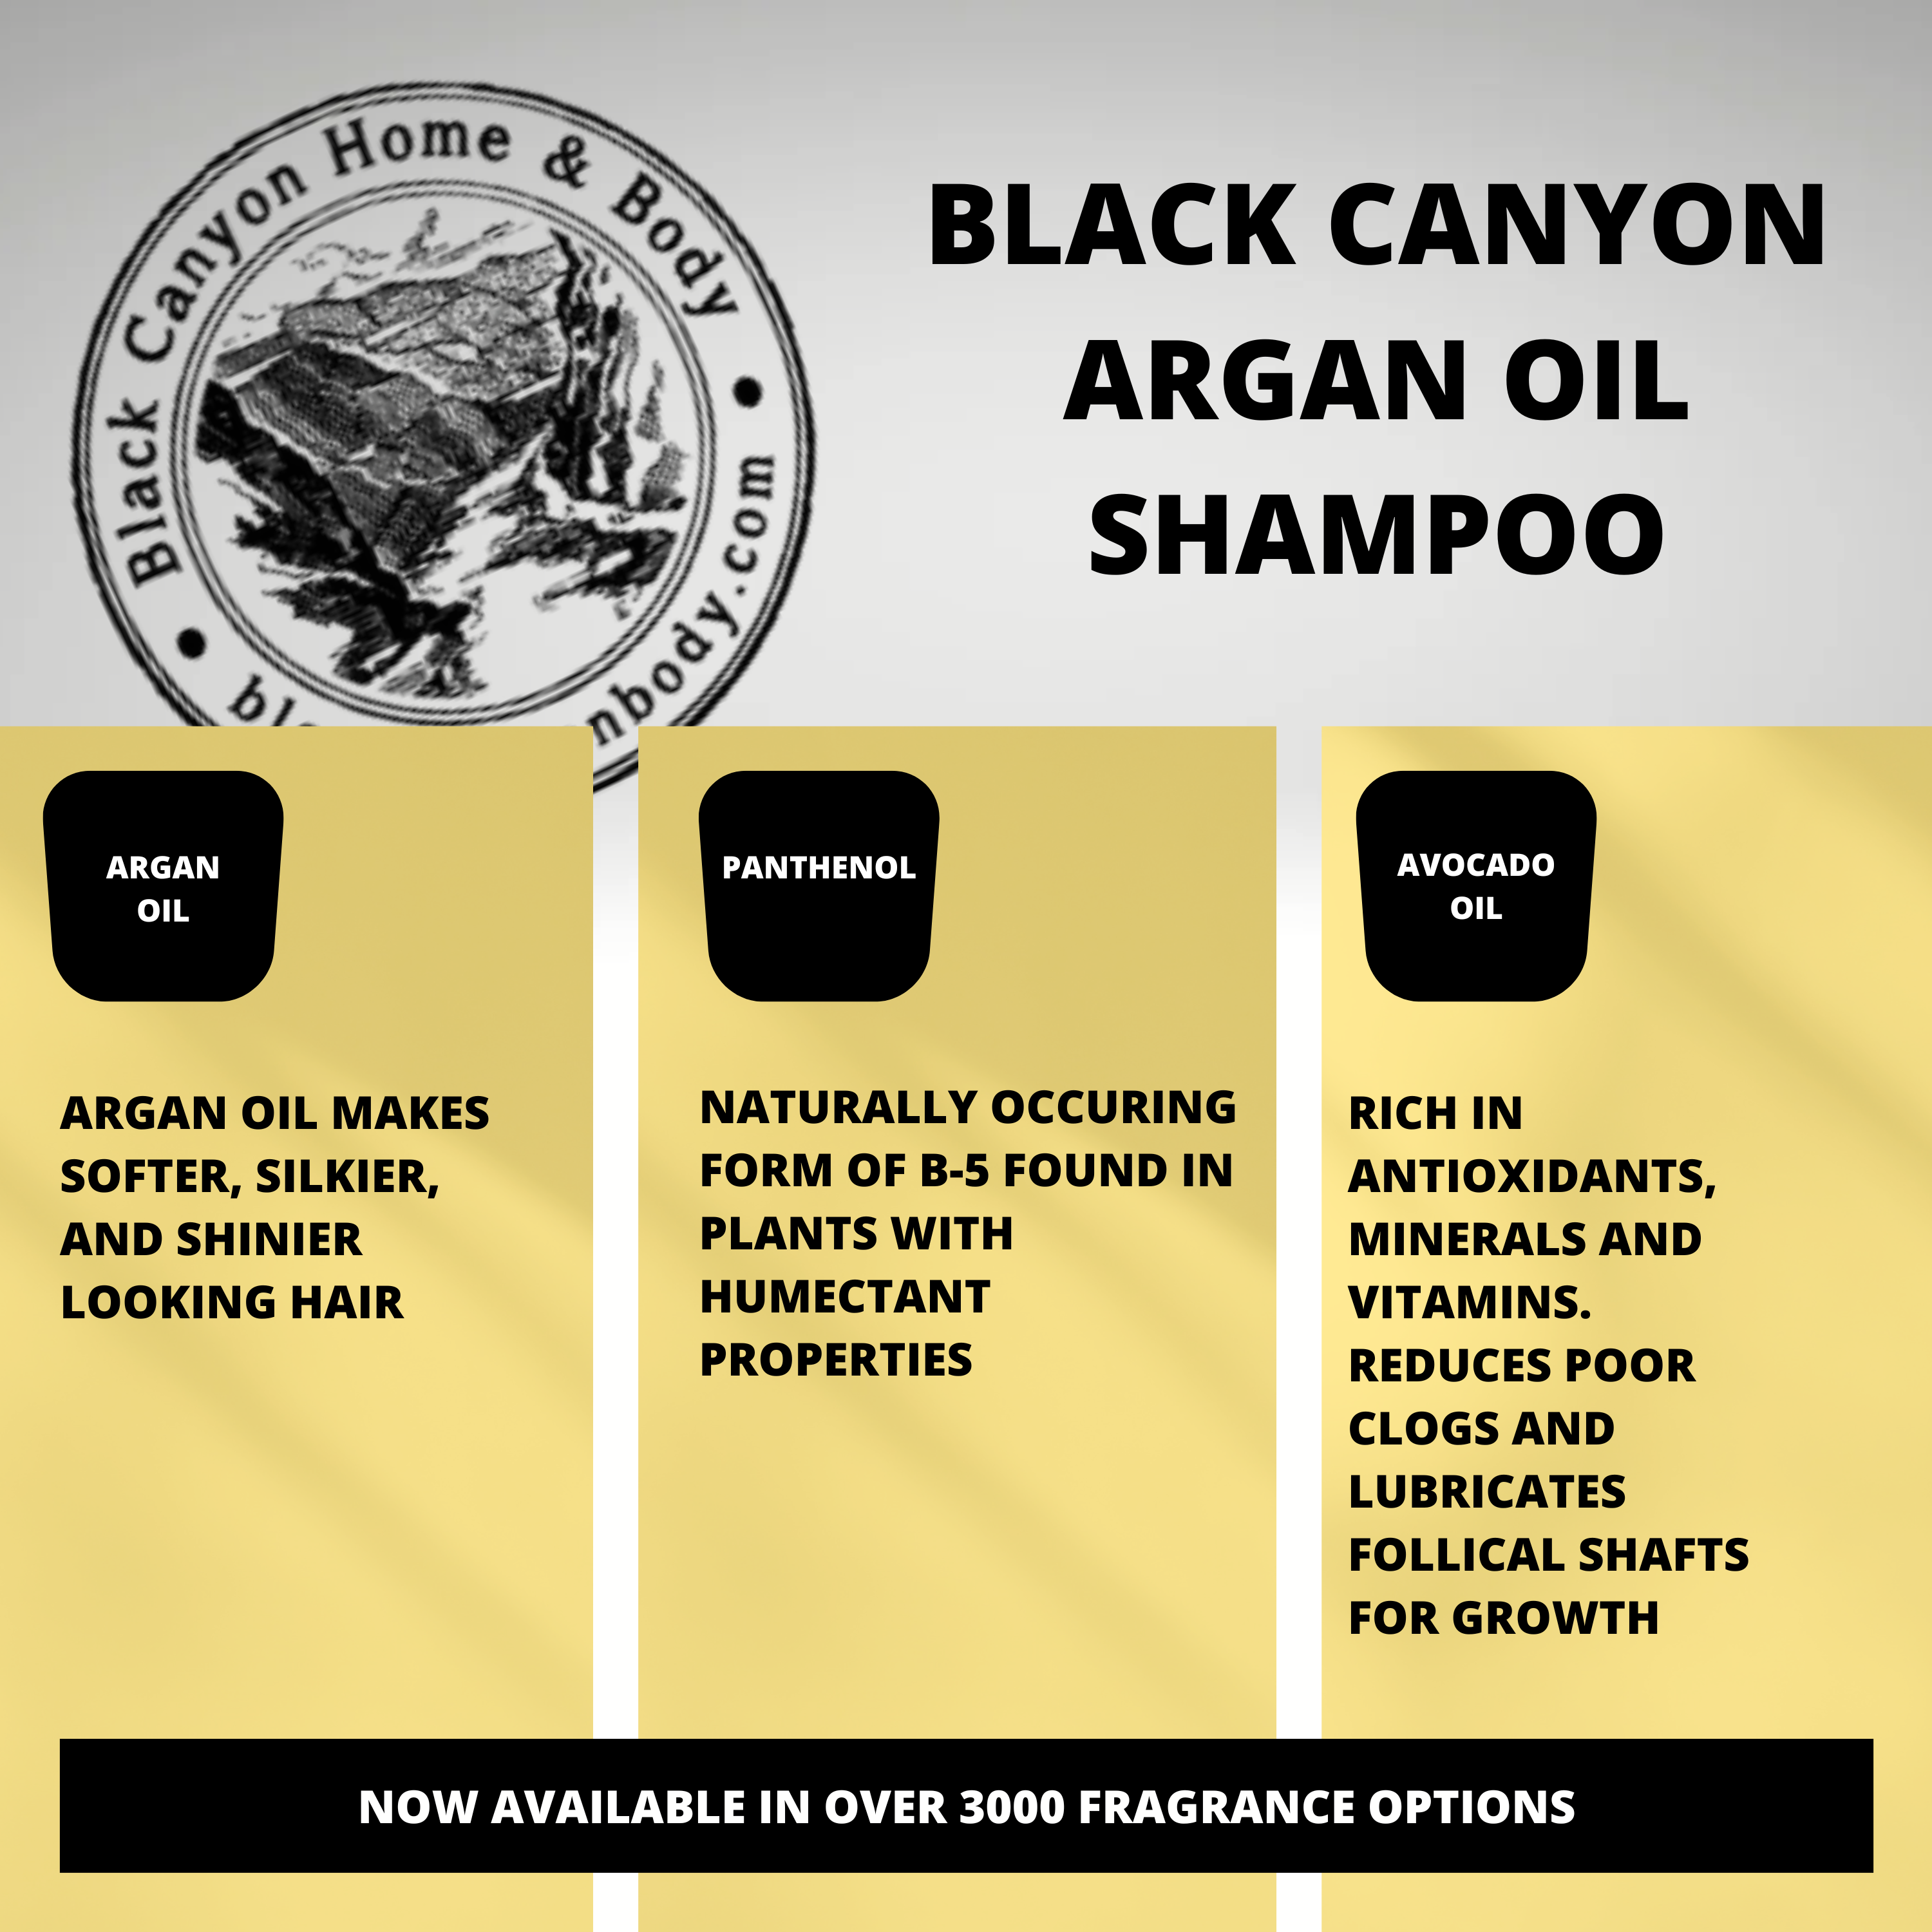 Black Canyon Lily & Peach Scented Shampoo with Argan Oil